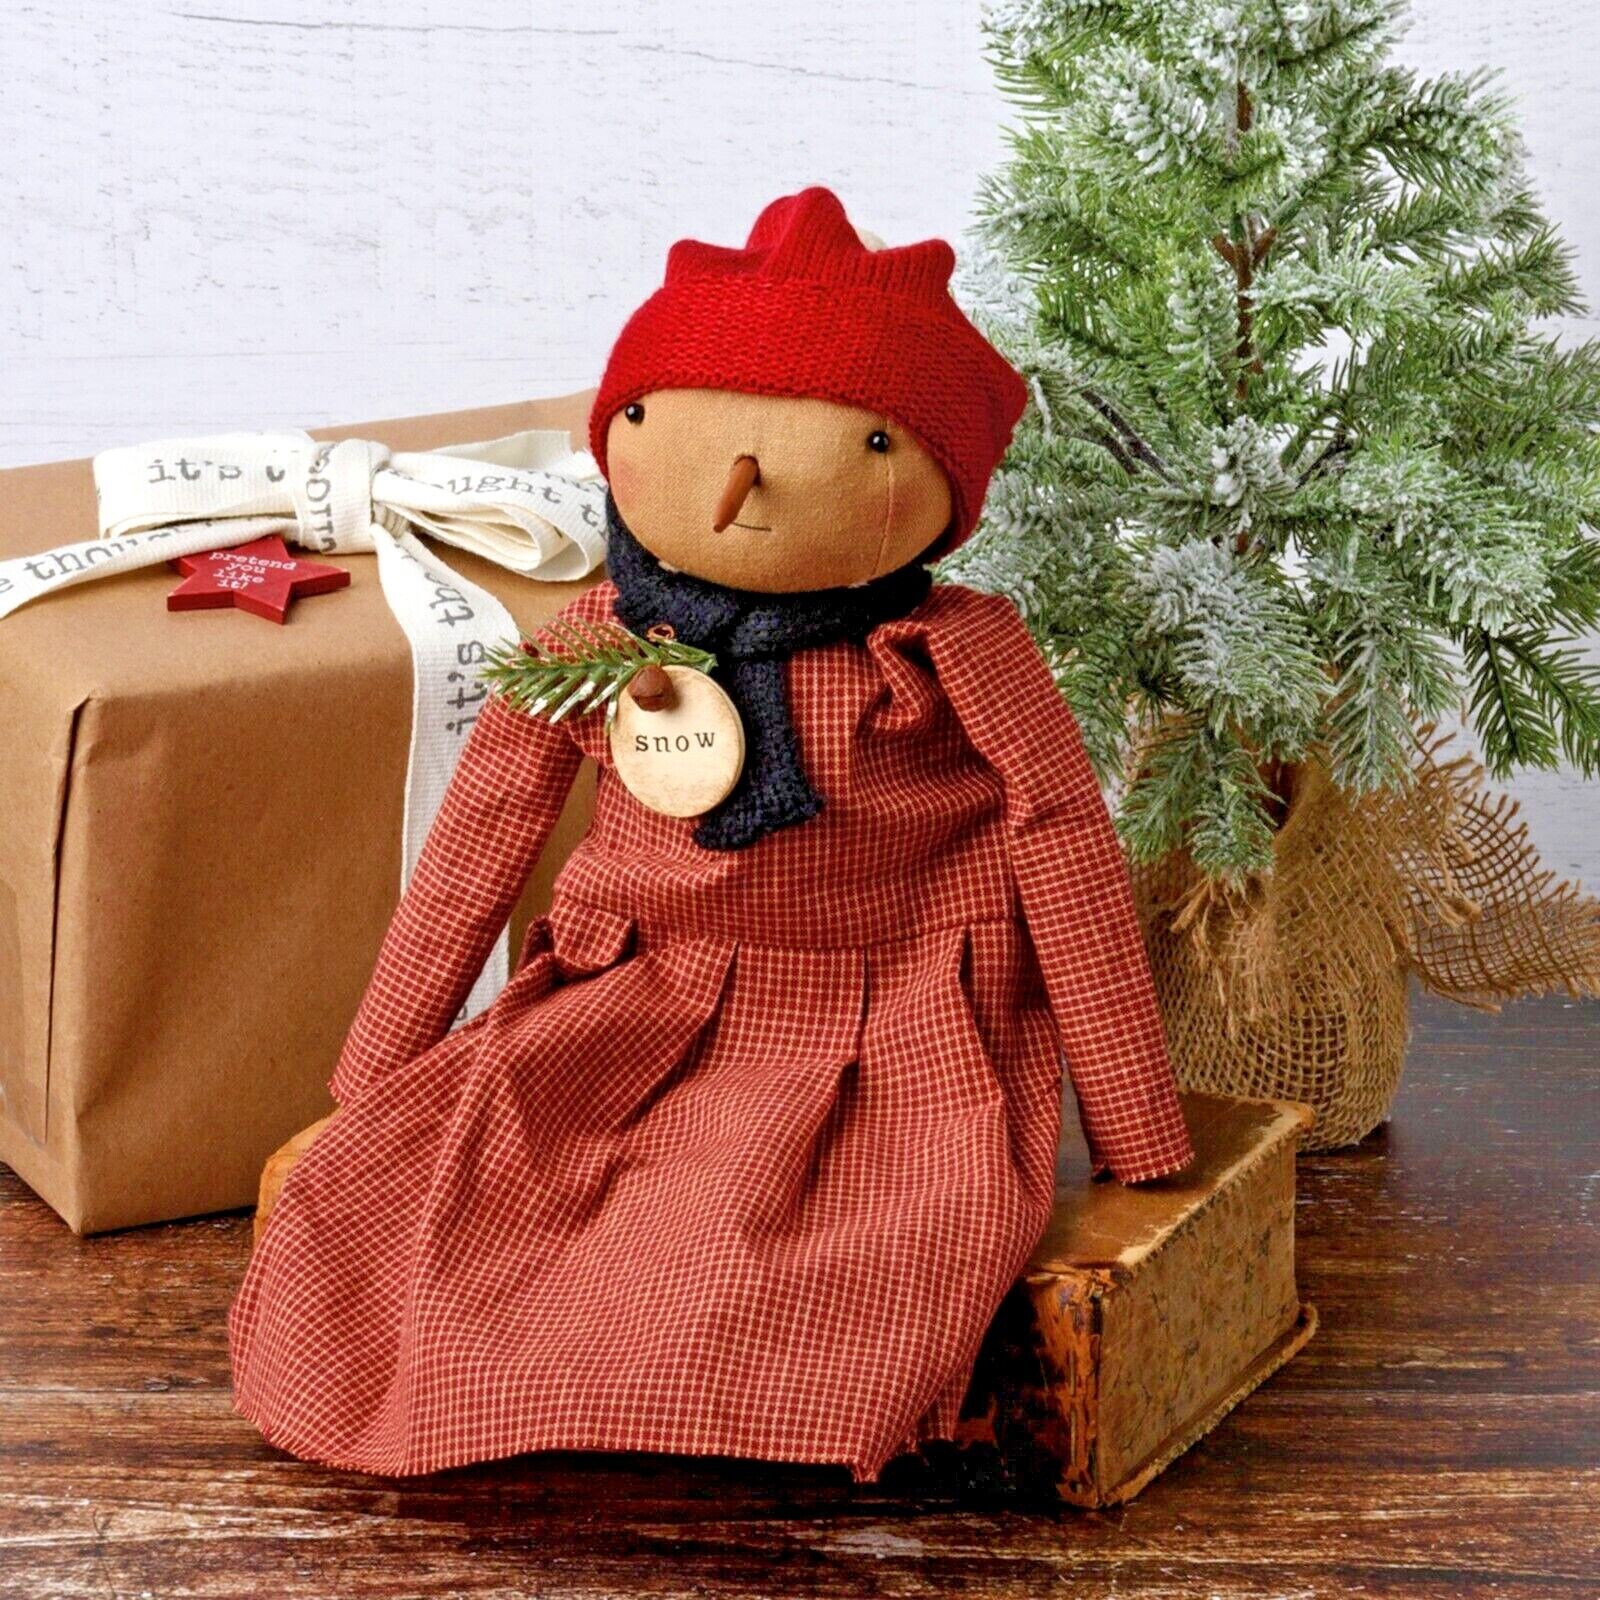 Primitive Country Christma Sierra Snow Girl Doll - The Primitive Pineapple Collection